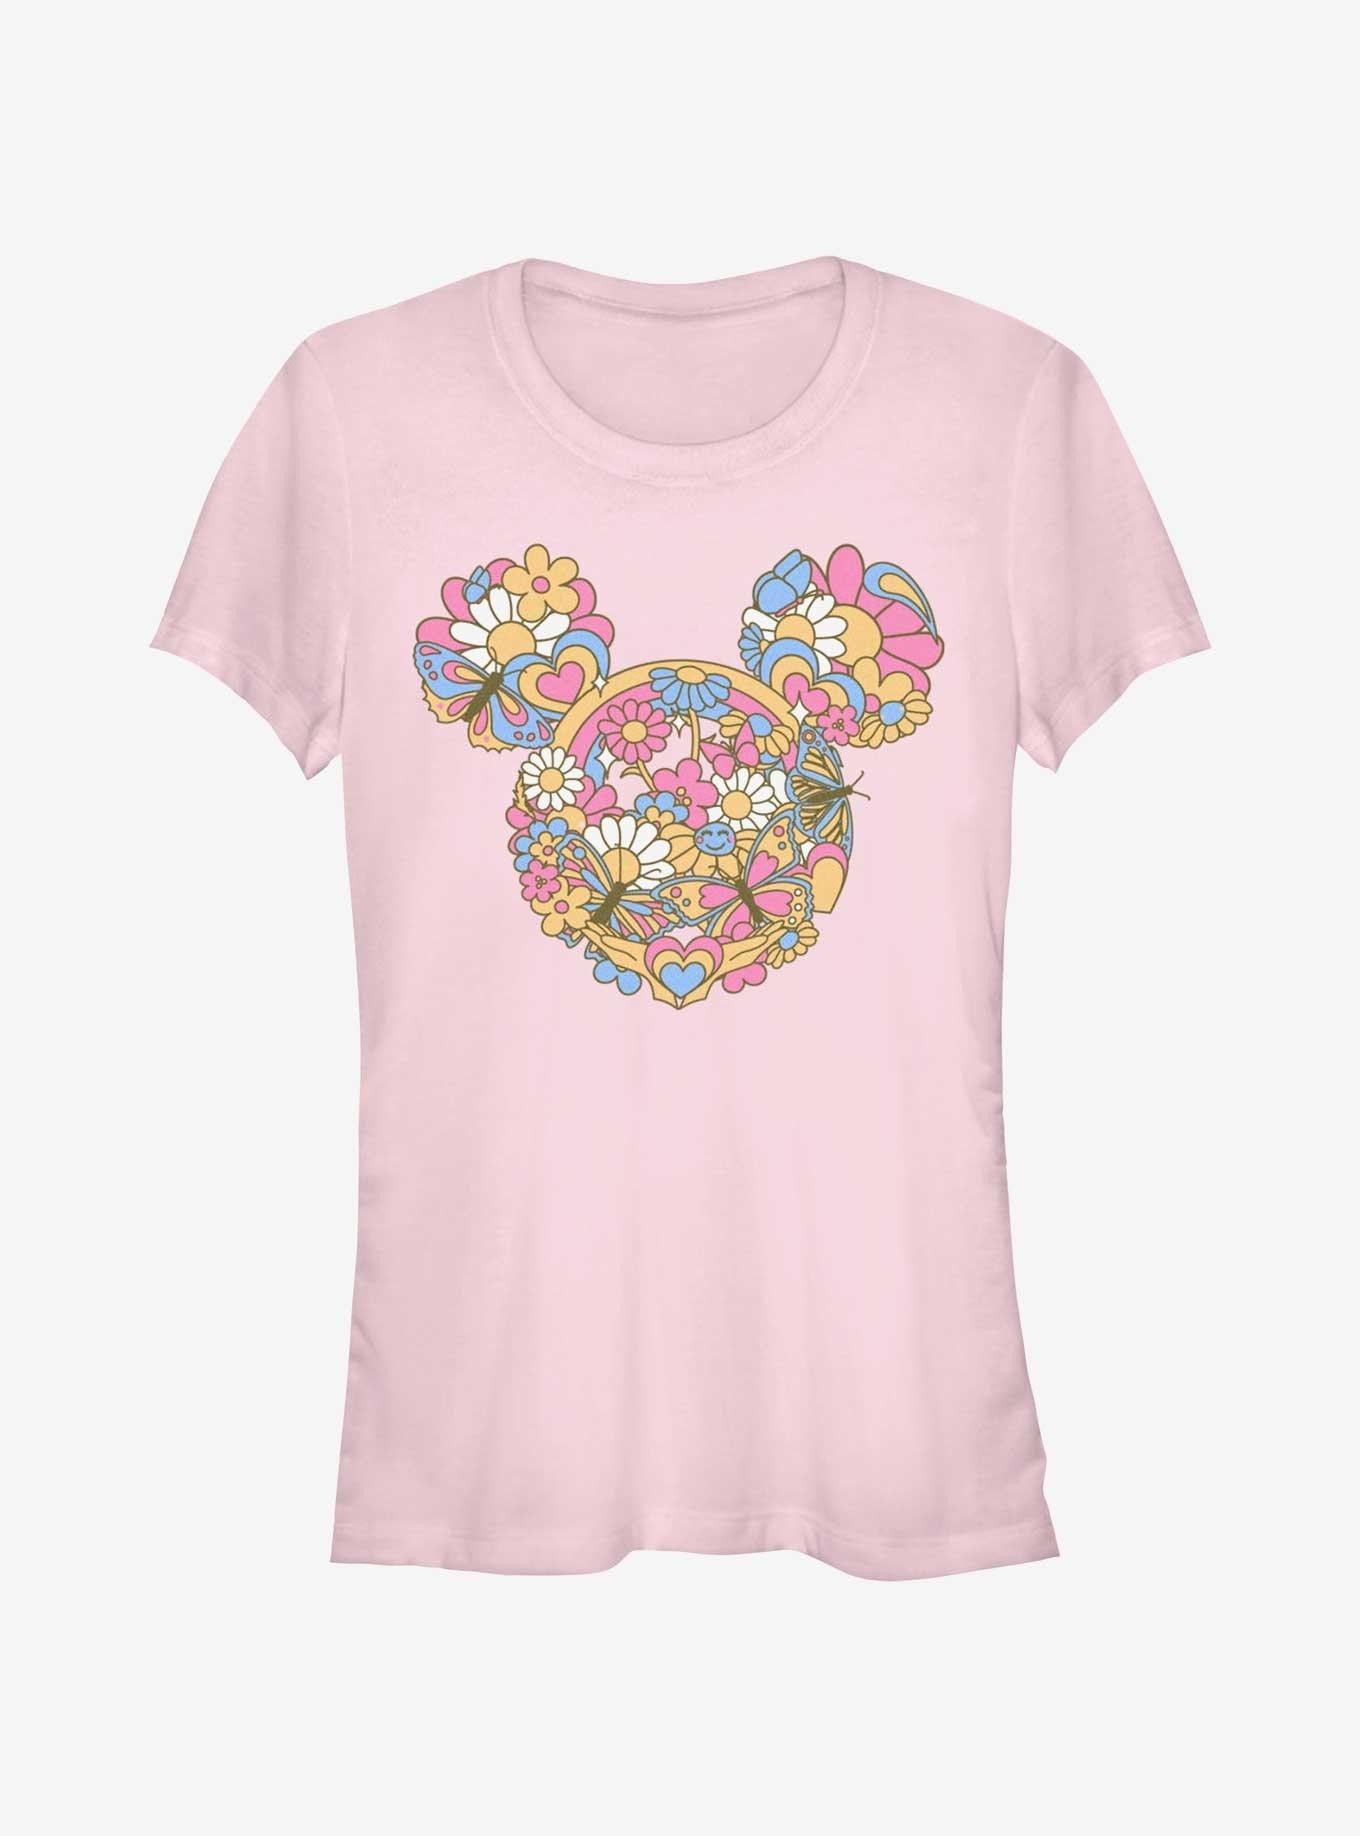 Disney Mickey Mouse Floral Head Girls T-Shirt, LIGHT PINK, hi-res